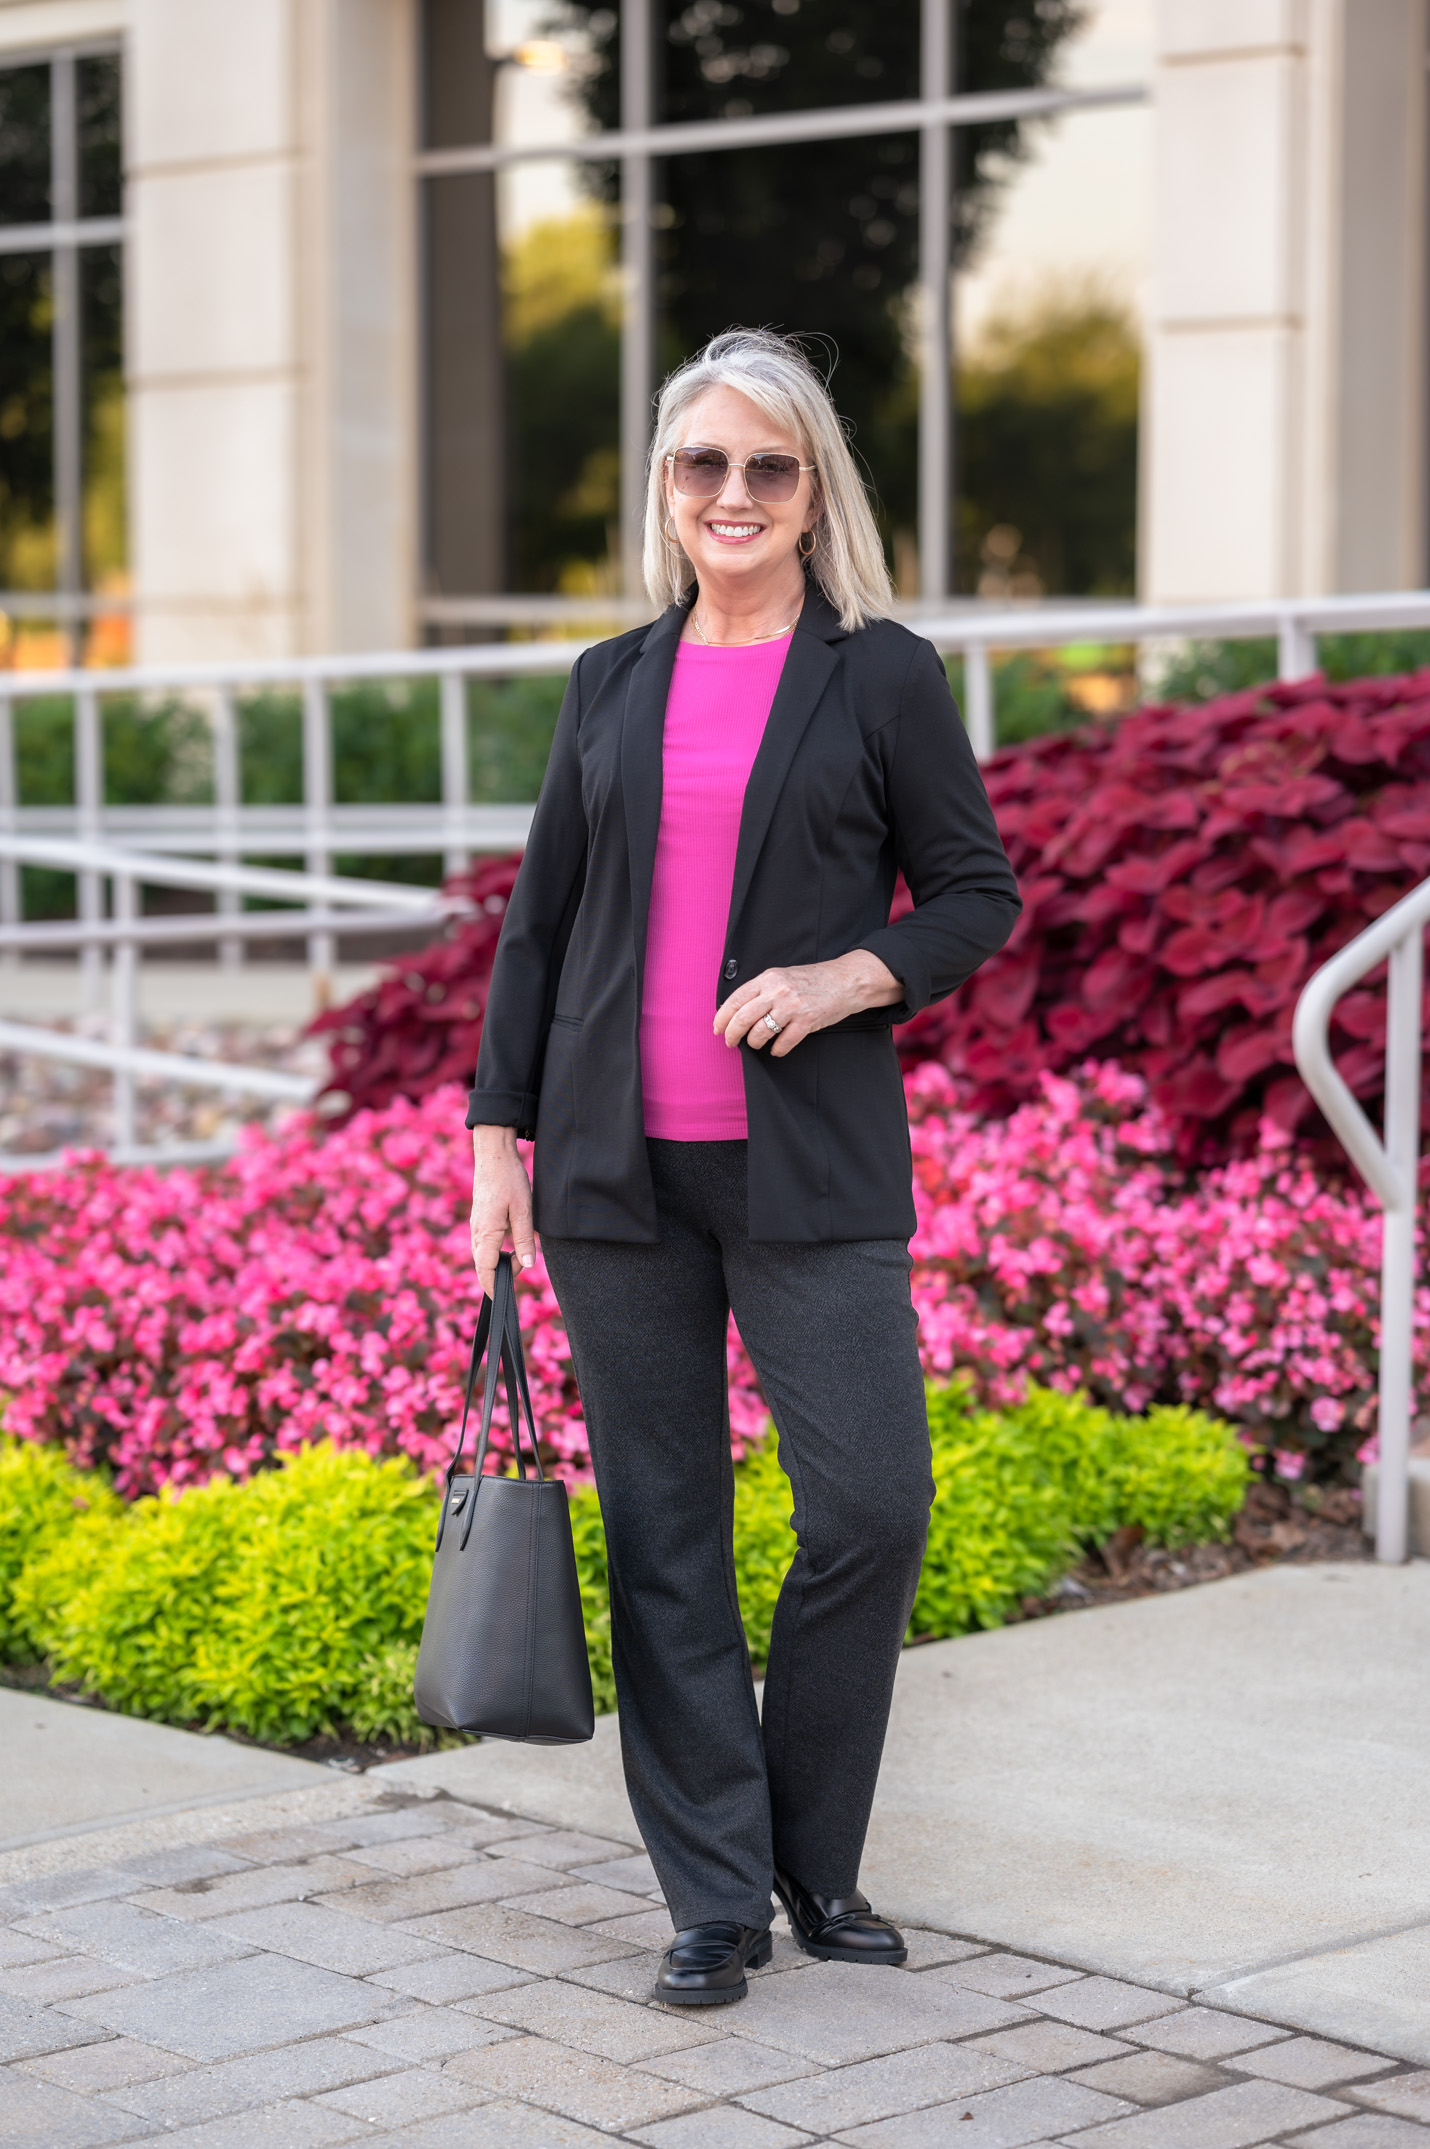 Teacher Outfits from Kohl's with Ponte Knit Pants